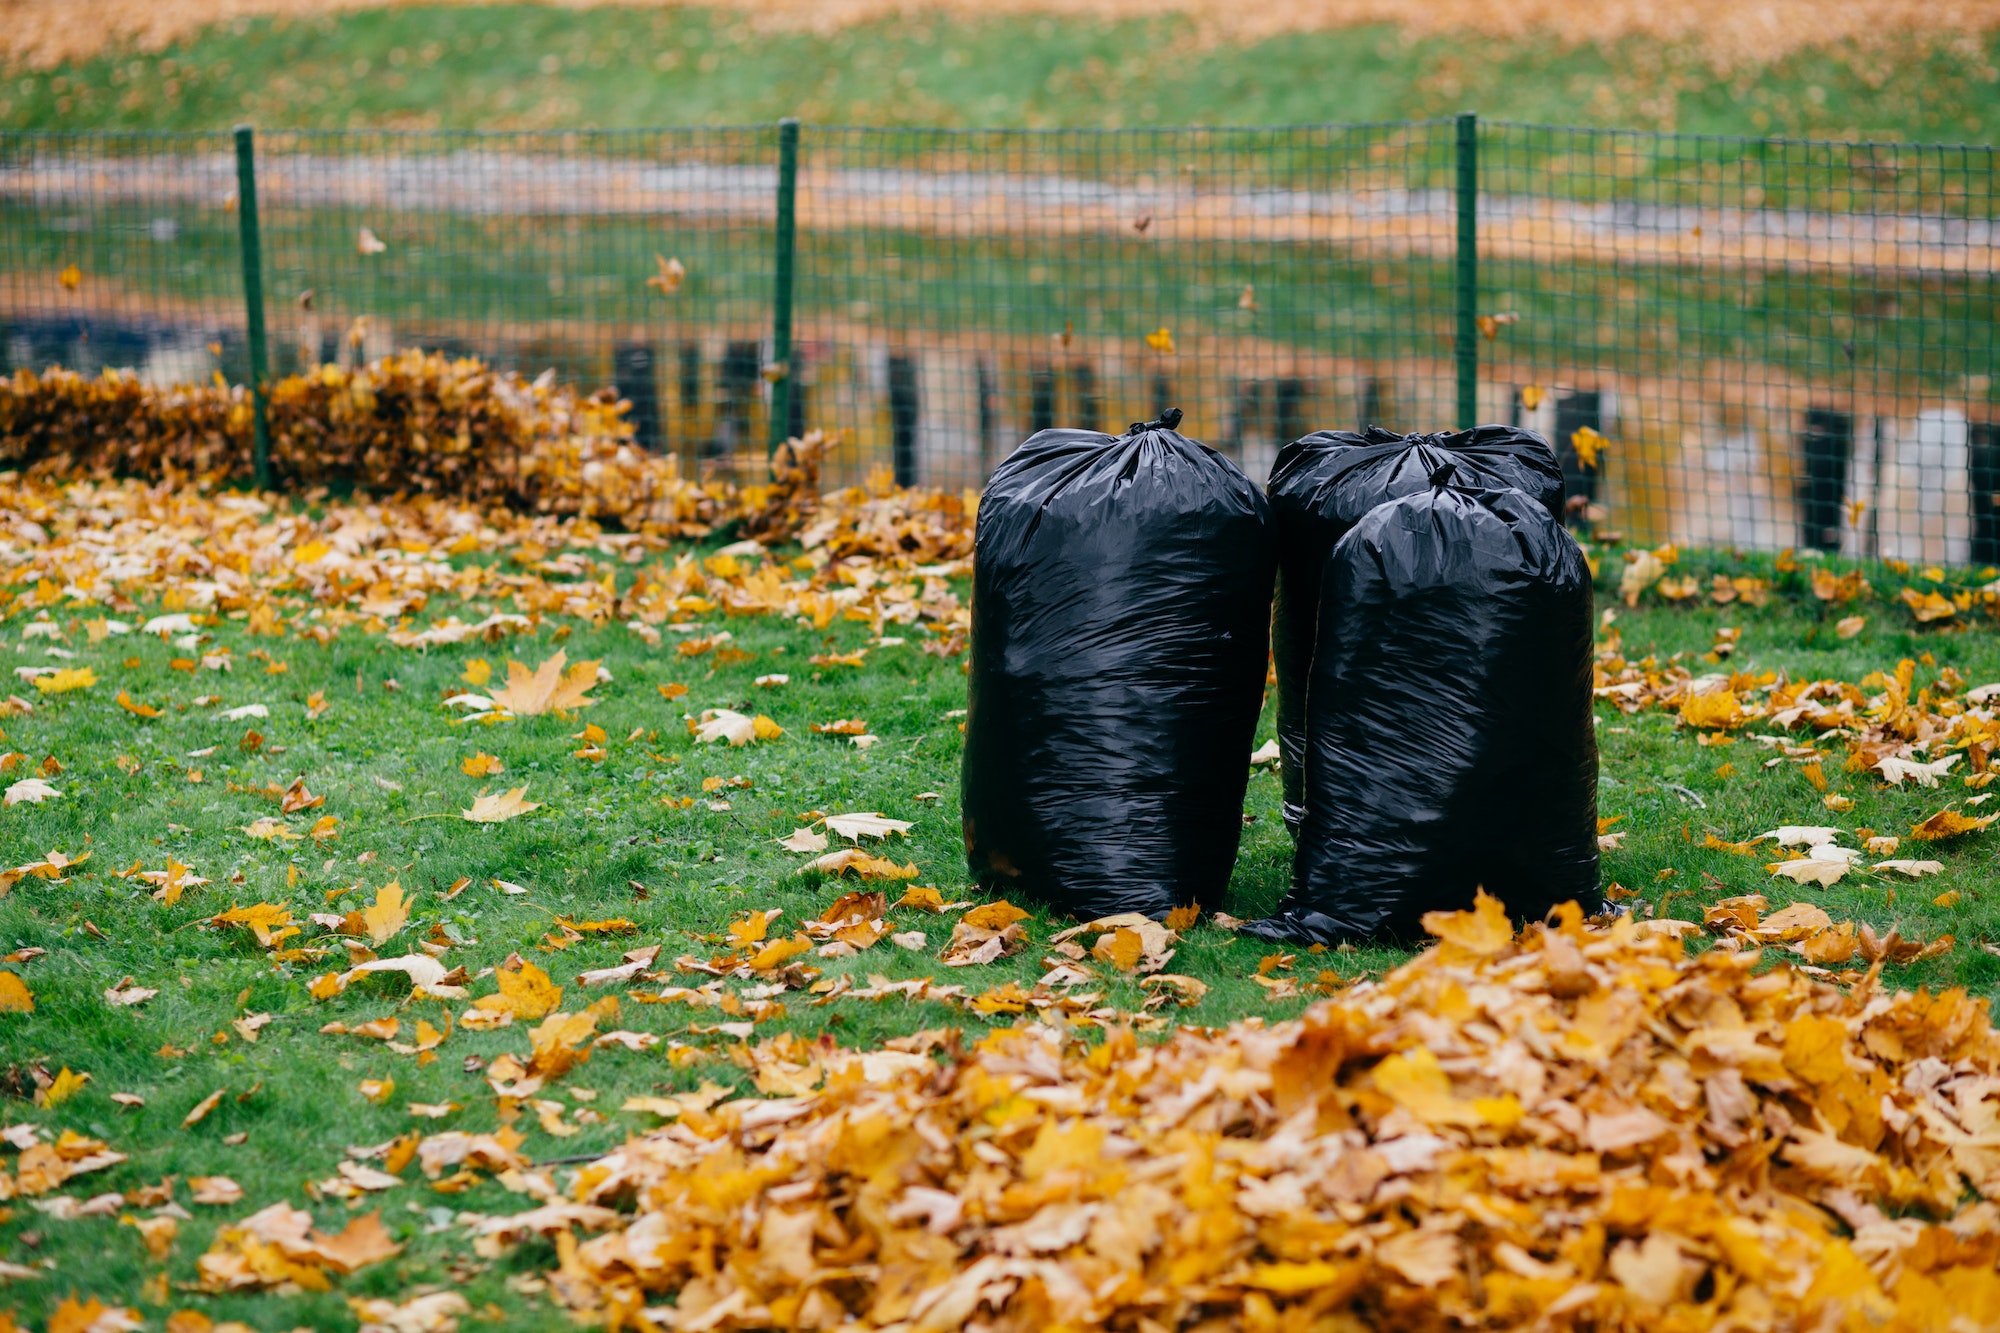 Black trash bags stand in park, filled with autumn fallen leaves against fence background